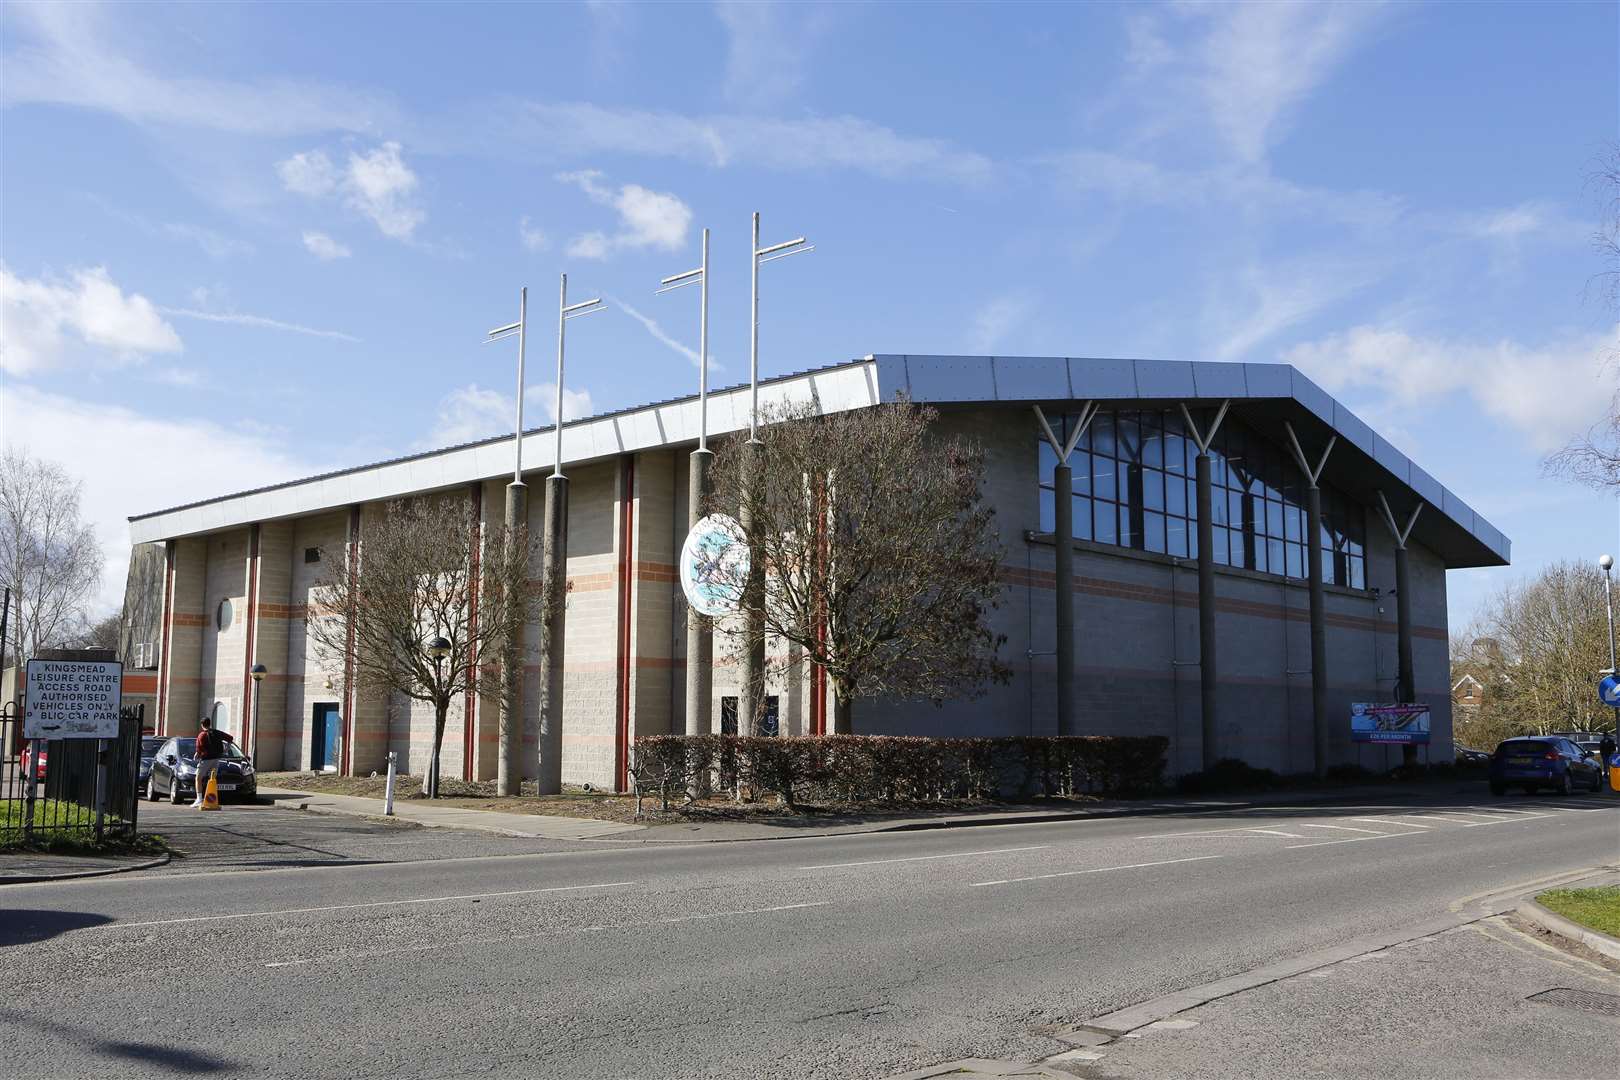 Kingsmead Leisure Centre was due for a revamp